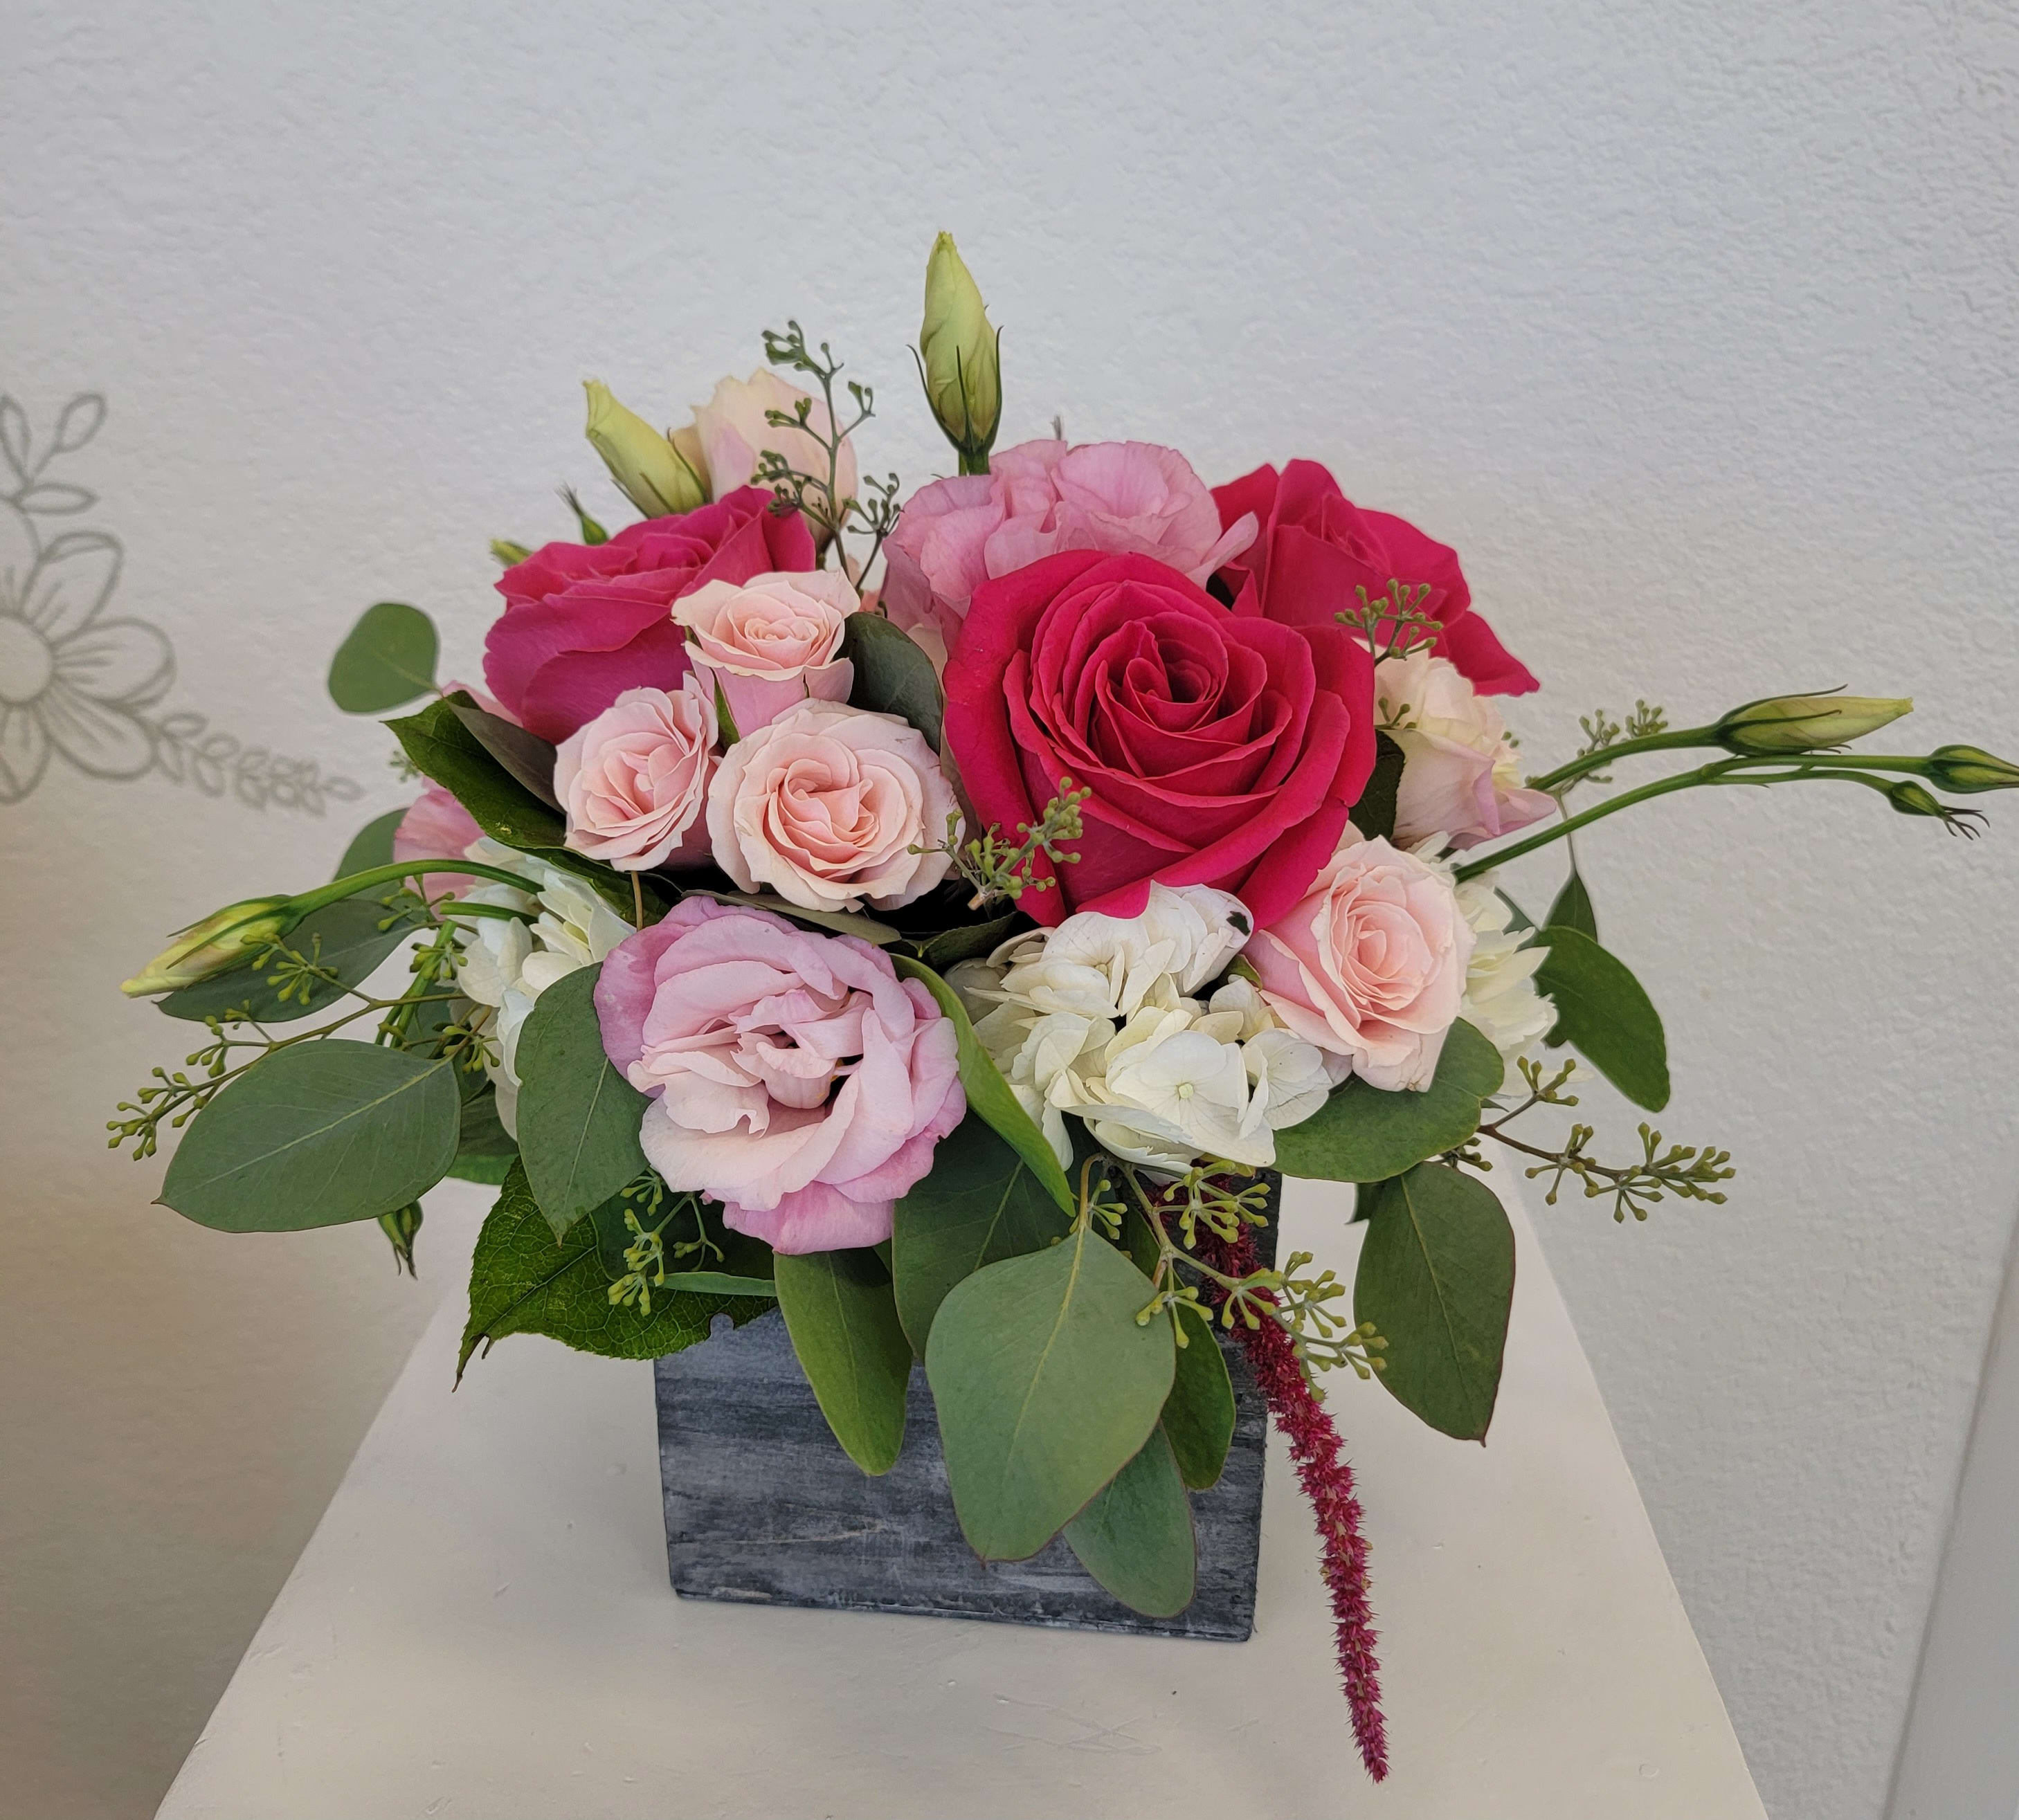 Petite Pink - hot pink roses, light pink lisianthus, hydrangea, spray roses and greenery in a cute wood box. A perfect arrangement for a desk or table.